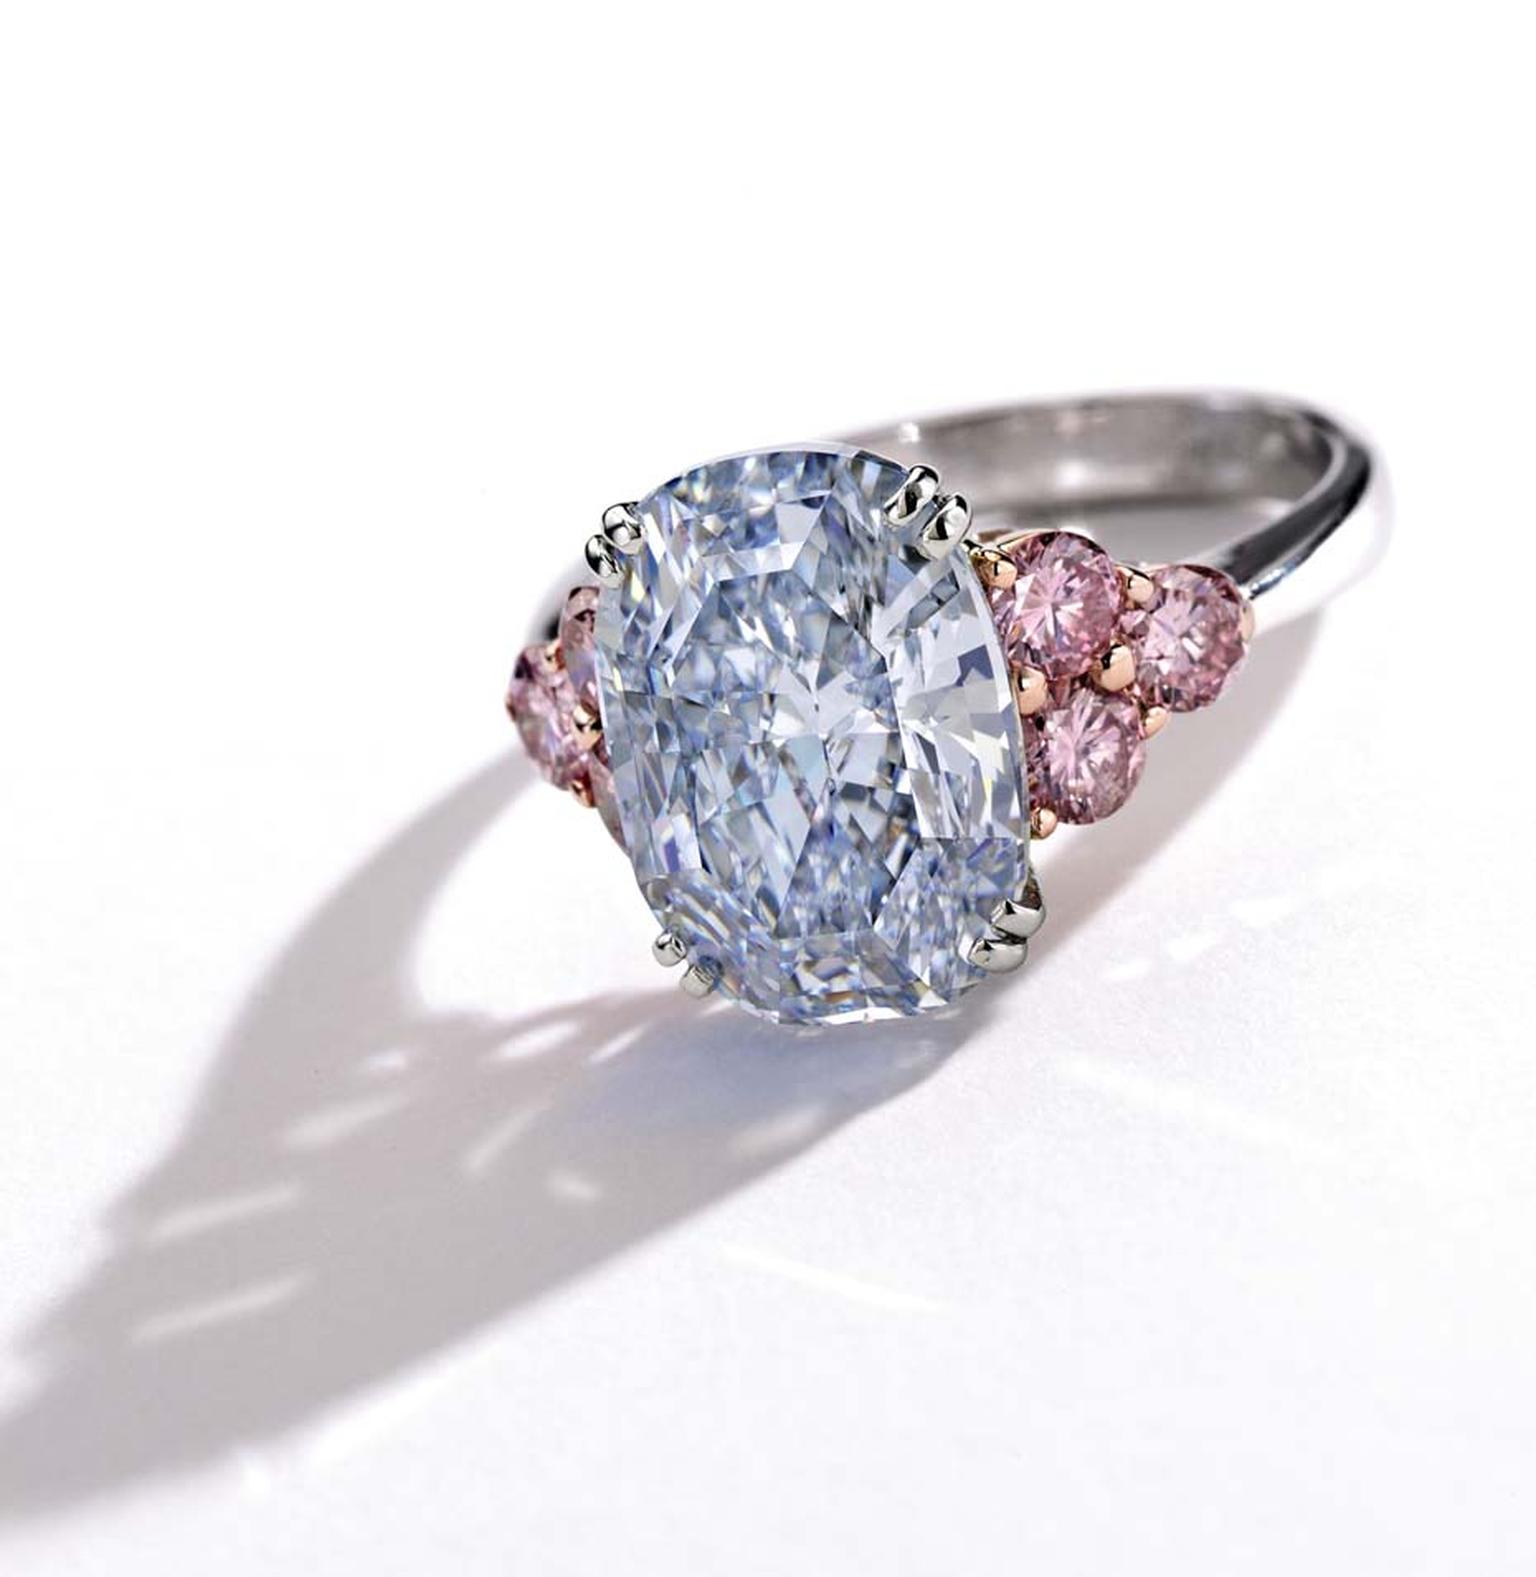 The Monarch Blue diamond ring, set in platinum and rose gold with an oval-shaped Fancy blue mixed-cut 6.06ct diamond, complemented by six pink-hued round diamonds, has an estimate of $3.5-4.5 million.